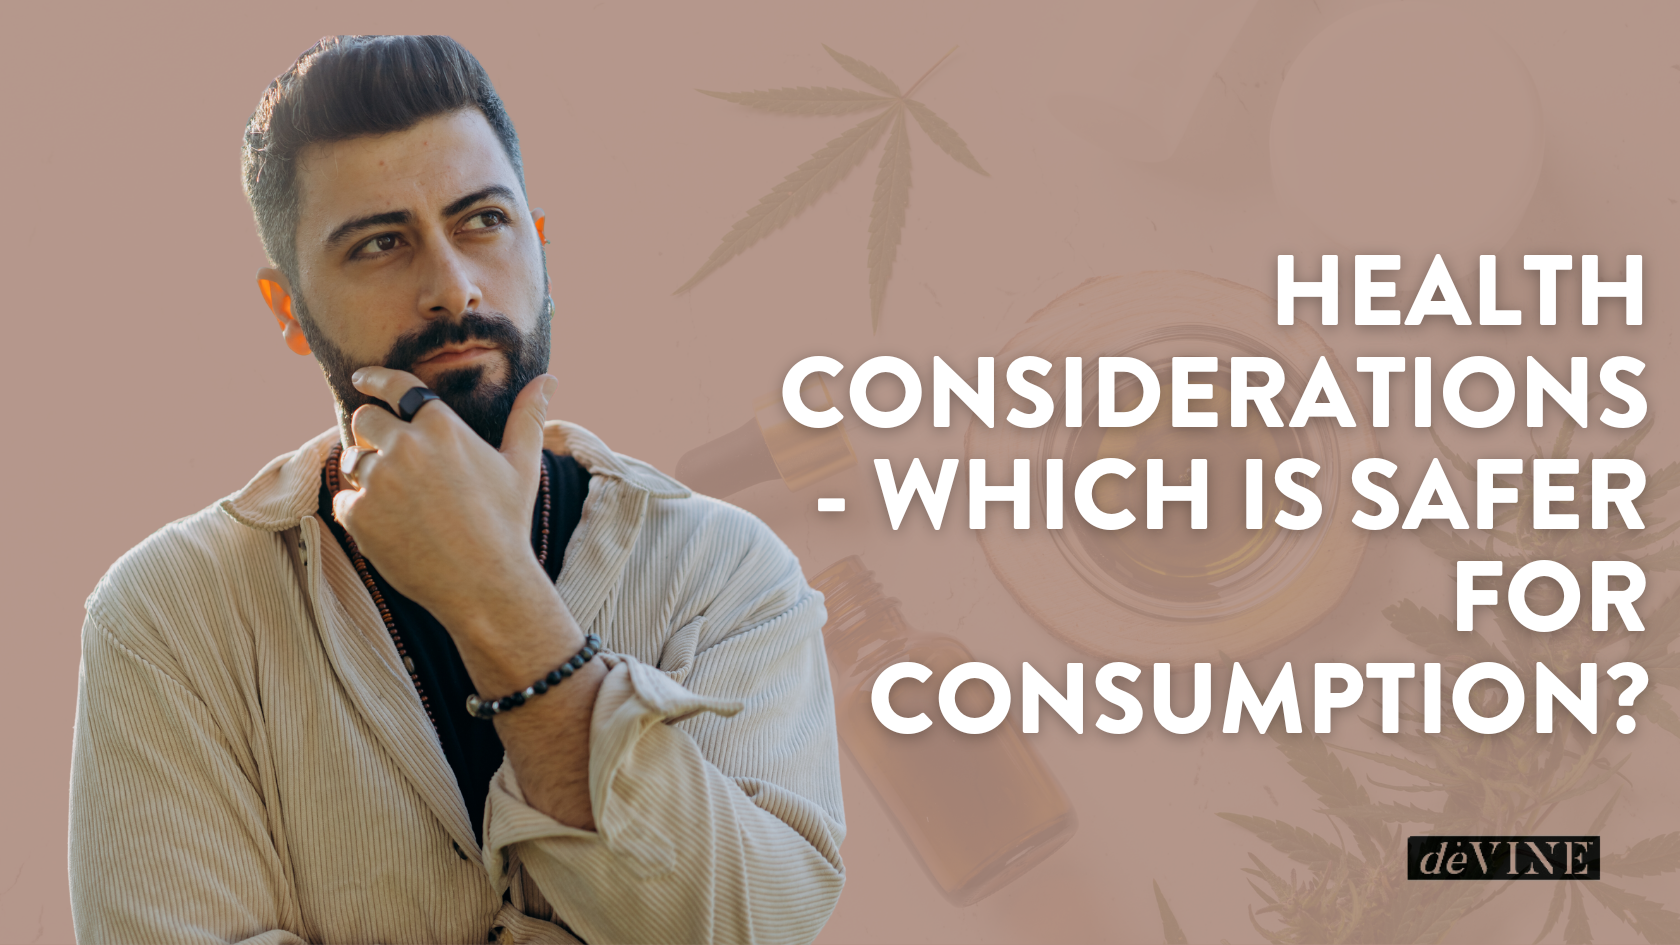 Health Considerations - Which Is Safer for Consumption?